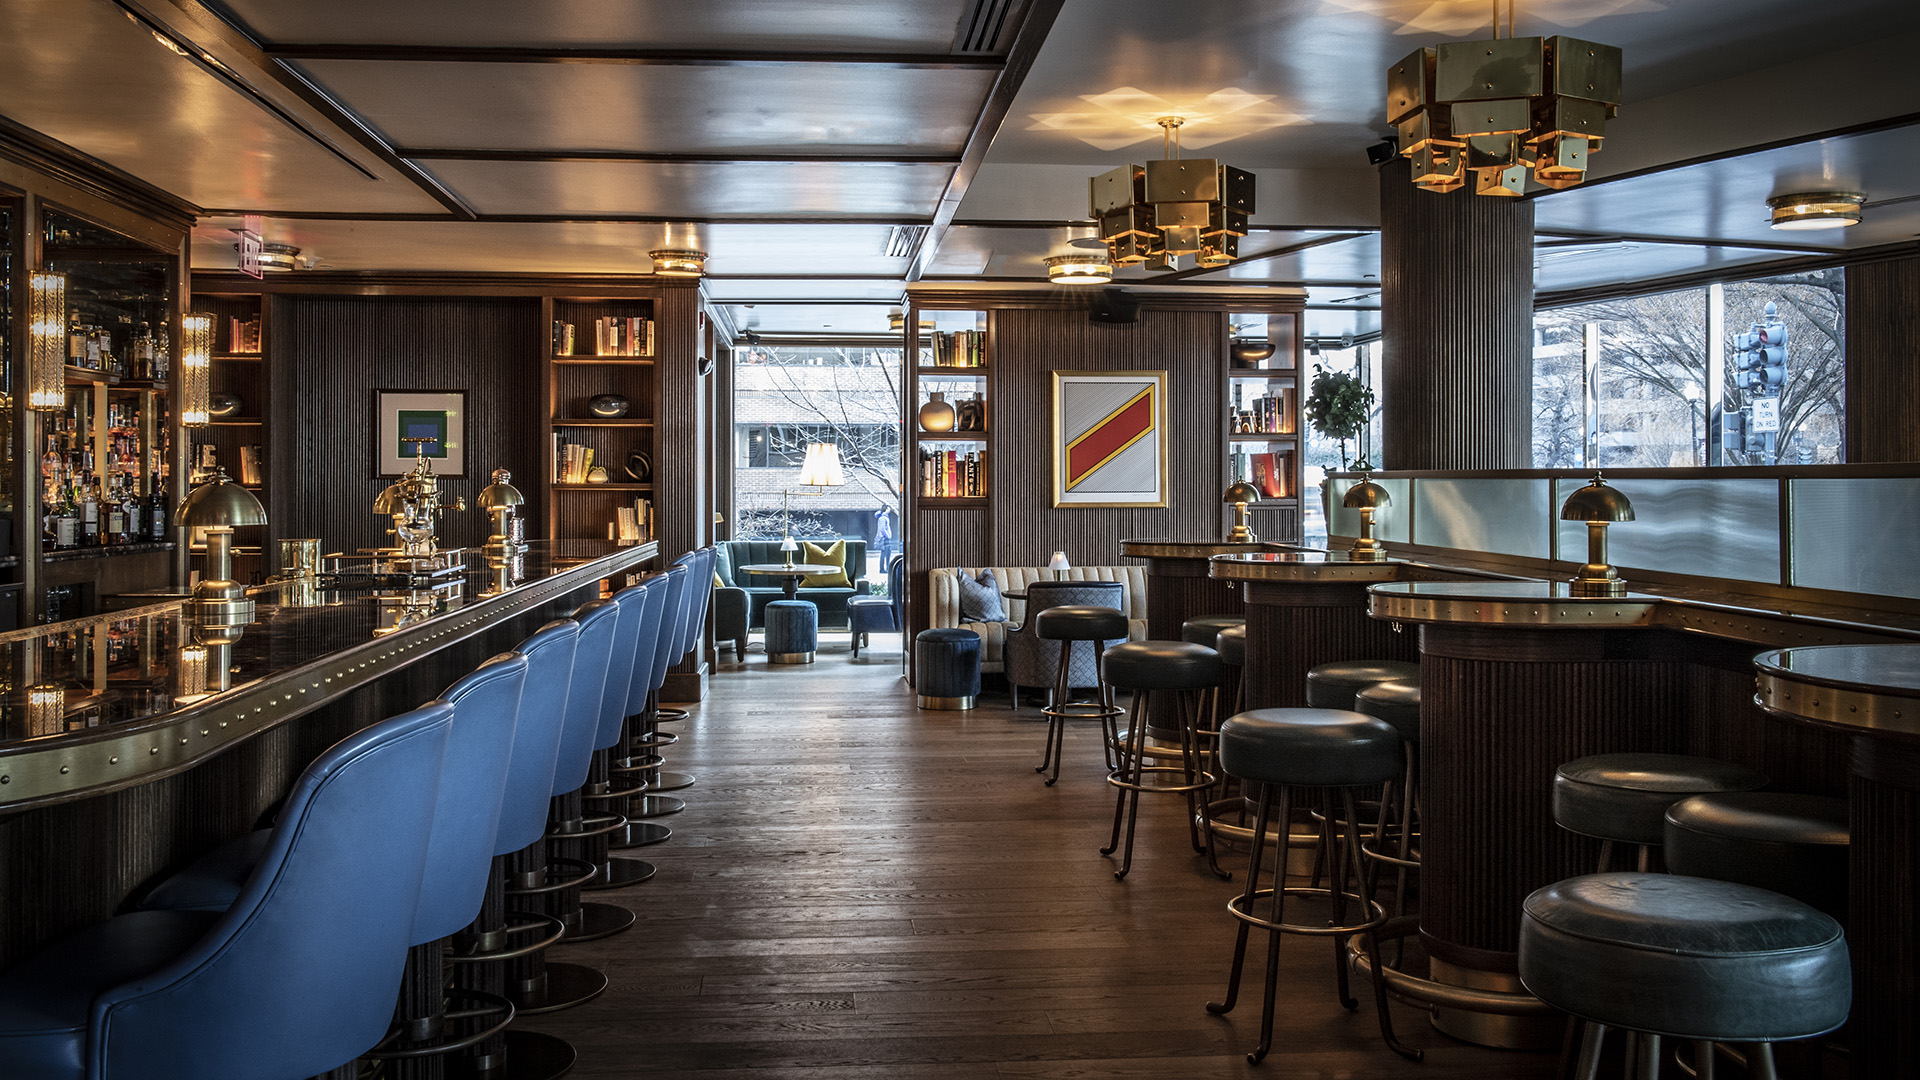 Art Deco ambiance meets classic cocktails. The Doyle Bar offers a stylish mid-century modern atmosphere inspired by the 1950s and 1960s cocktail lounge scene.